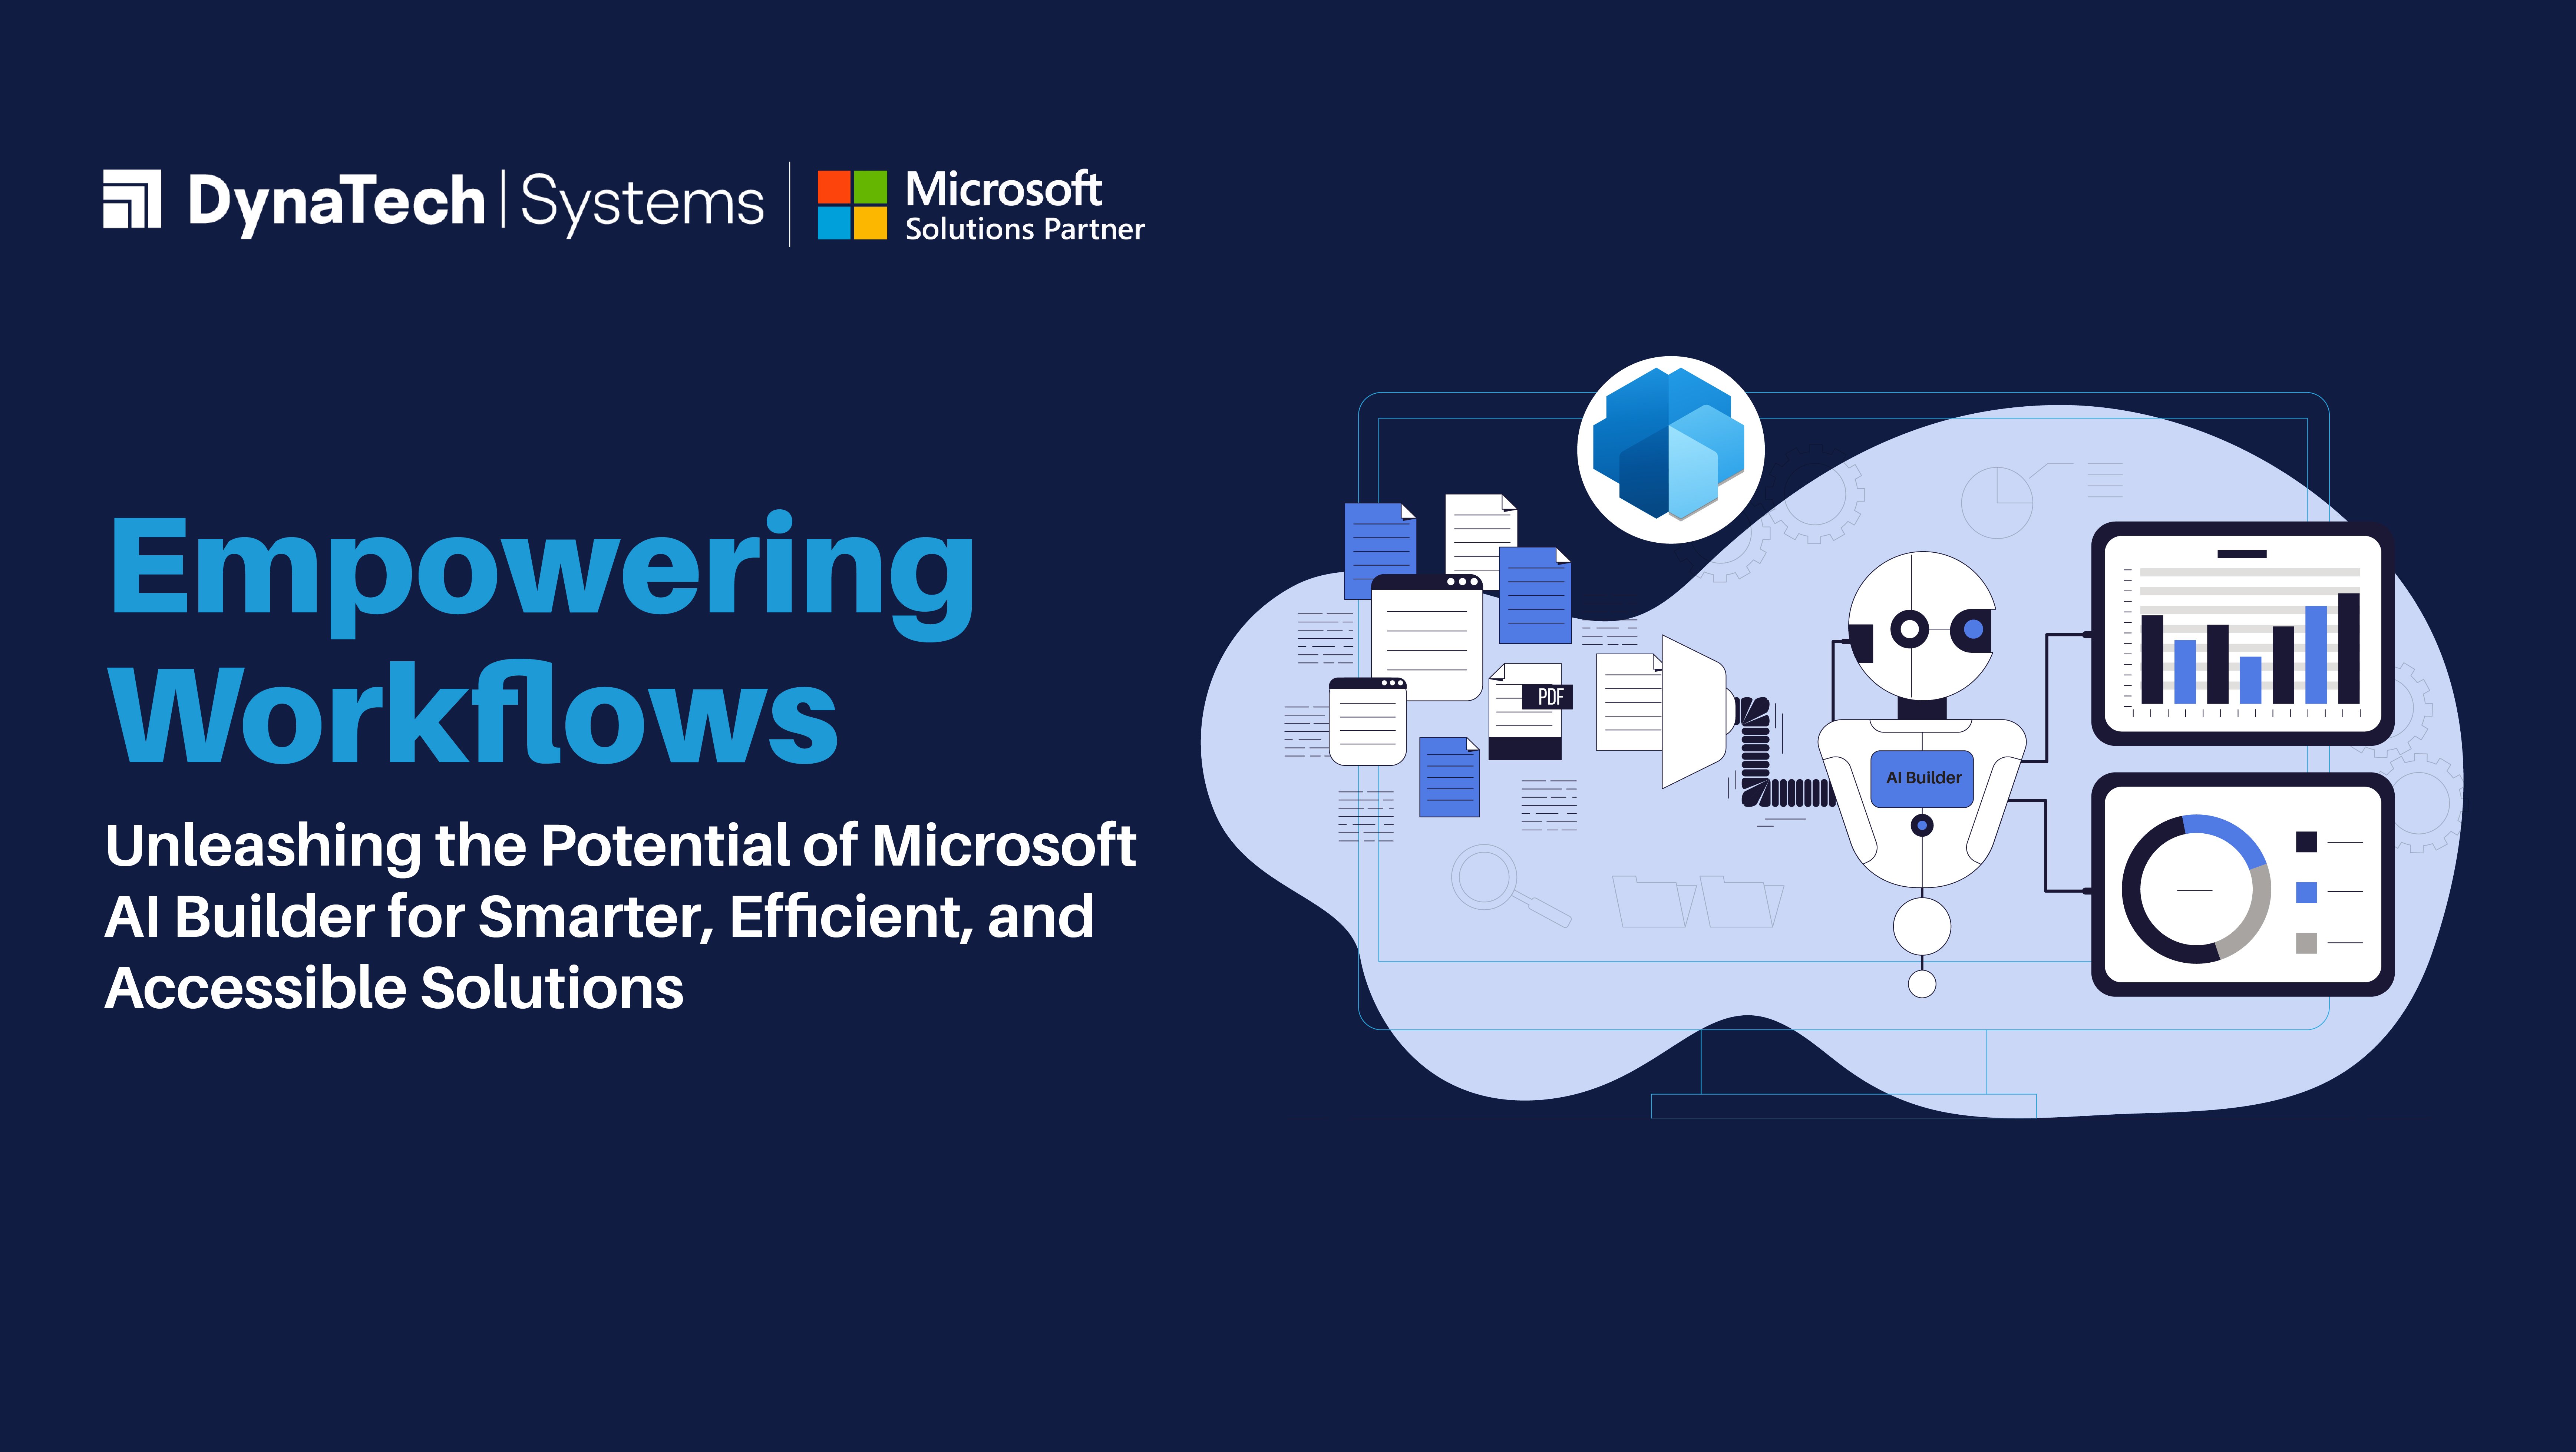 Empowering Workflows: Unleashing the Potential of Microsoft AI Builder for Smarter, Efficient, and Accessible Solutions